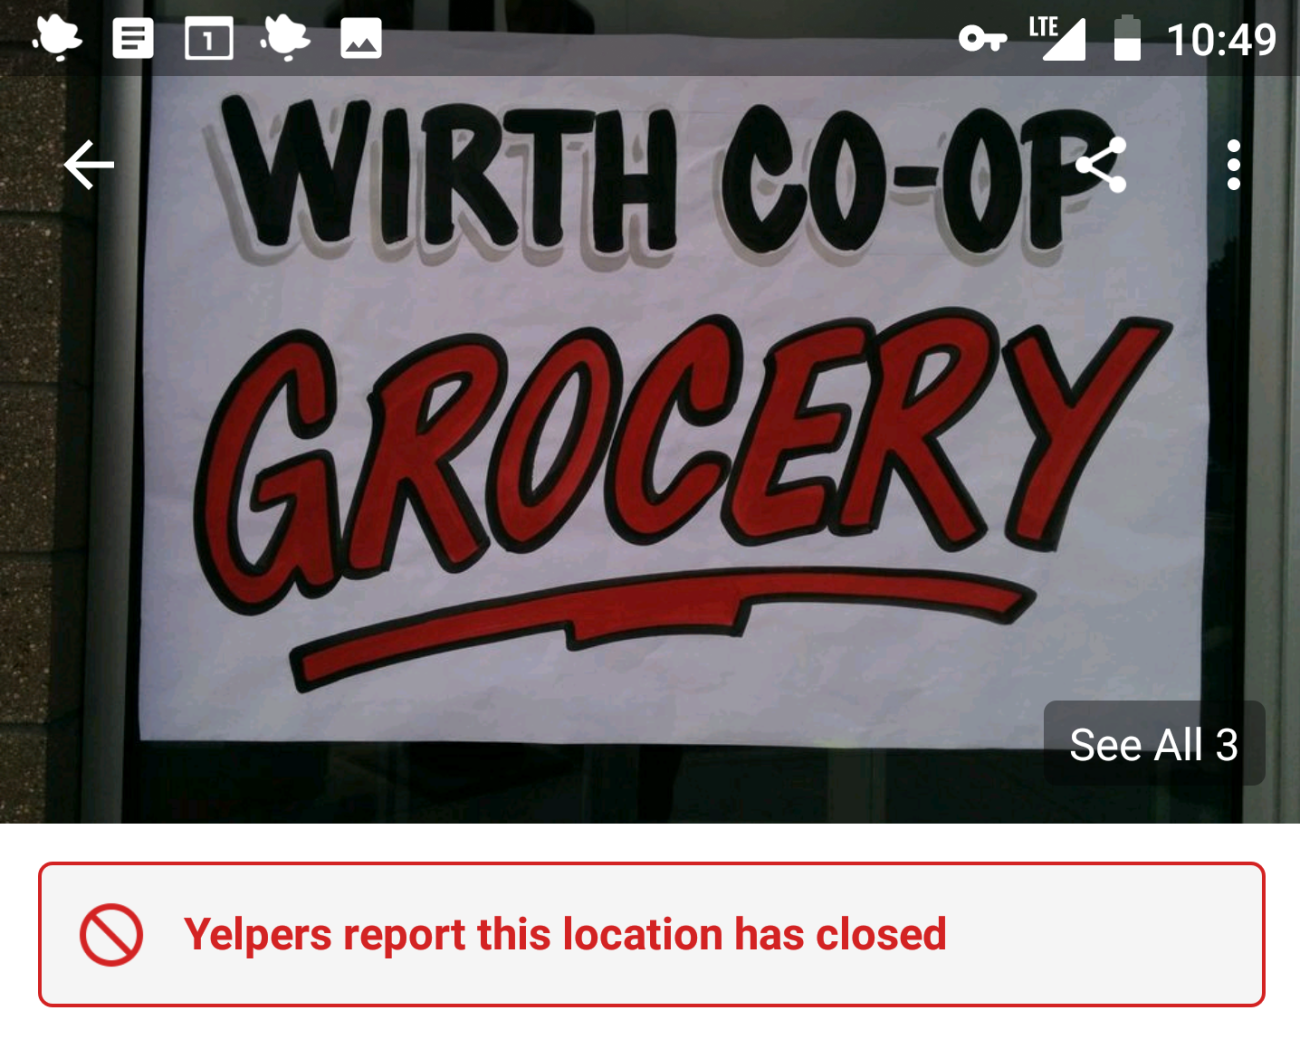 Screenshot from an Android phone, with a picture of a store window sign "Wirth Co-op Grocery" and the line "Yelpers report this location has closed"